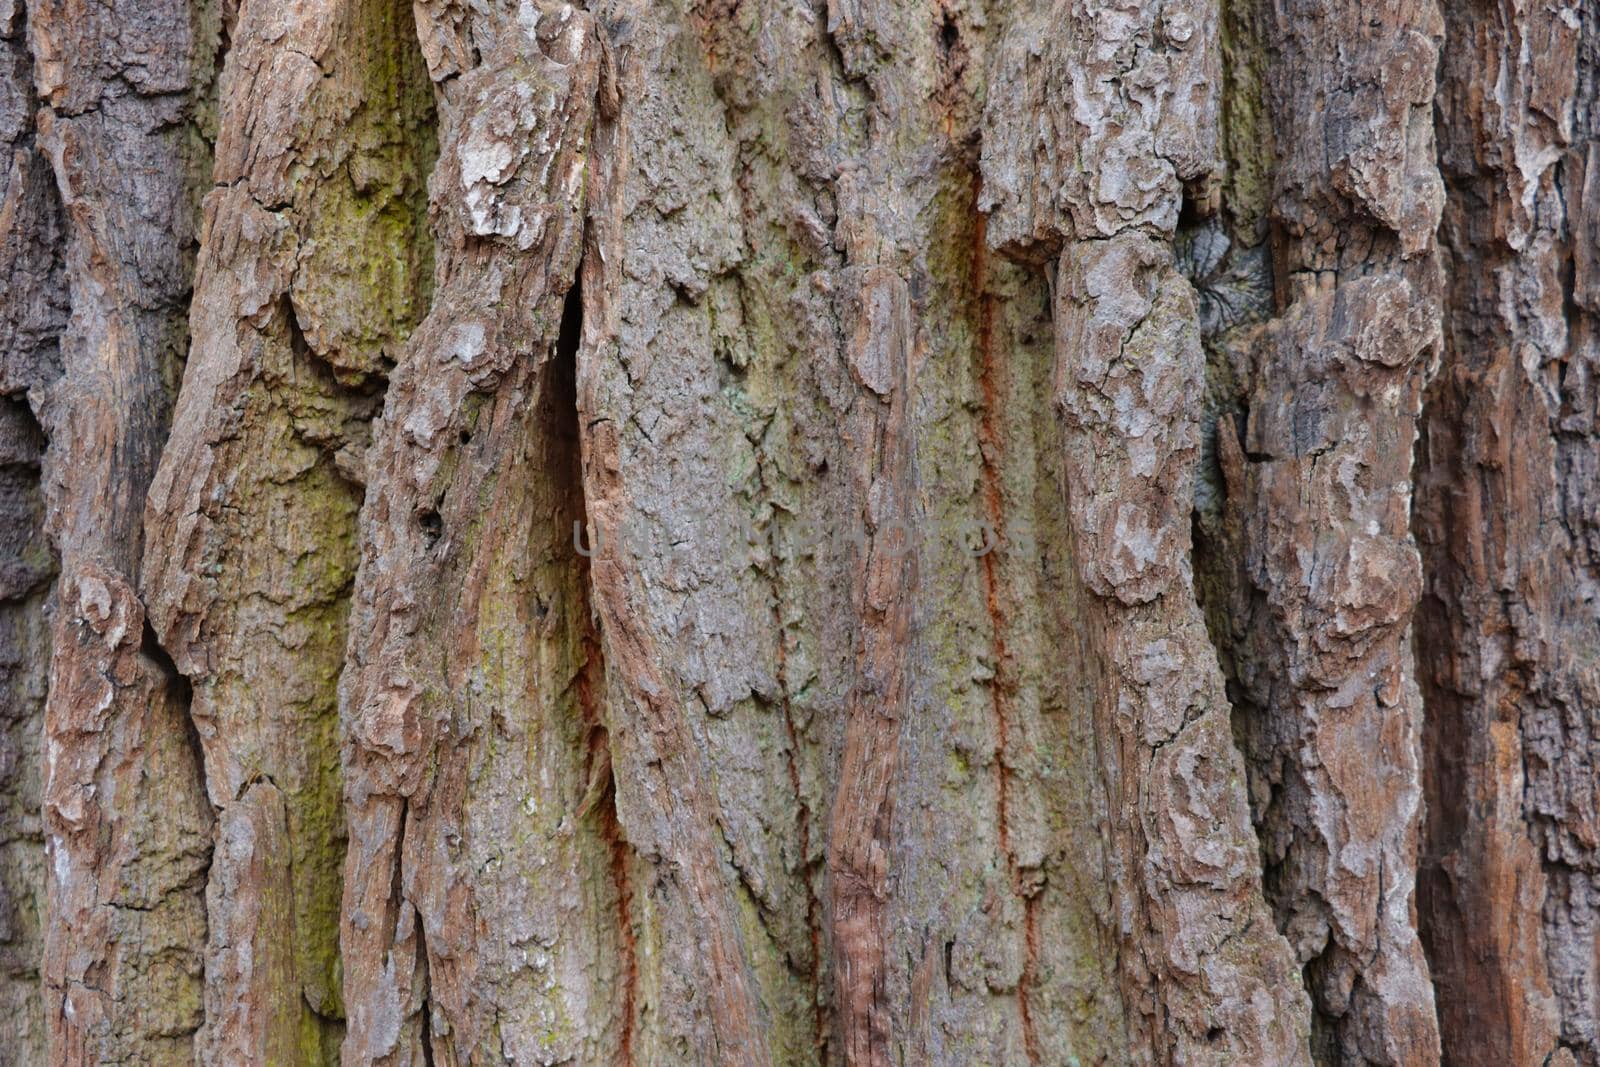 Close-up on the bark and trunk of an old large tree, wood grain